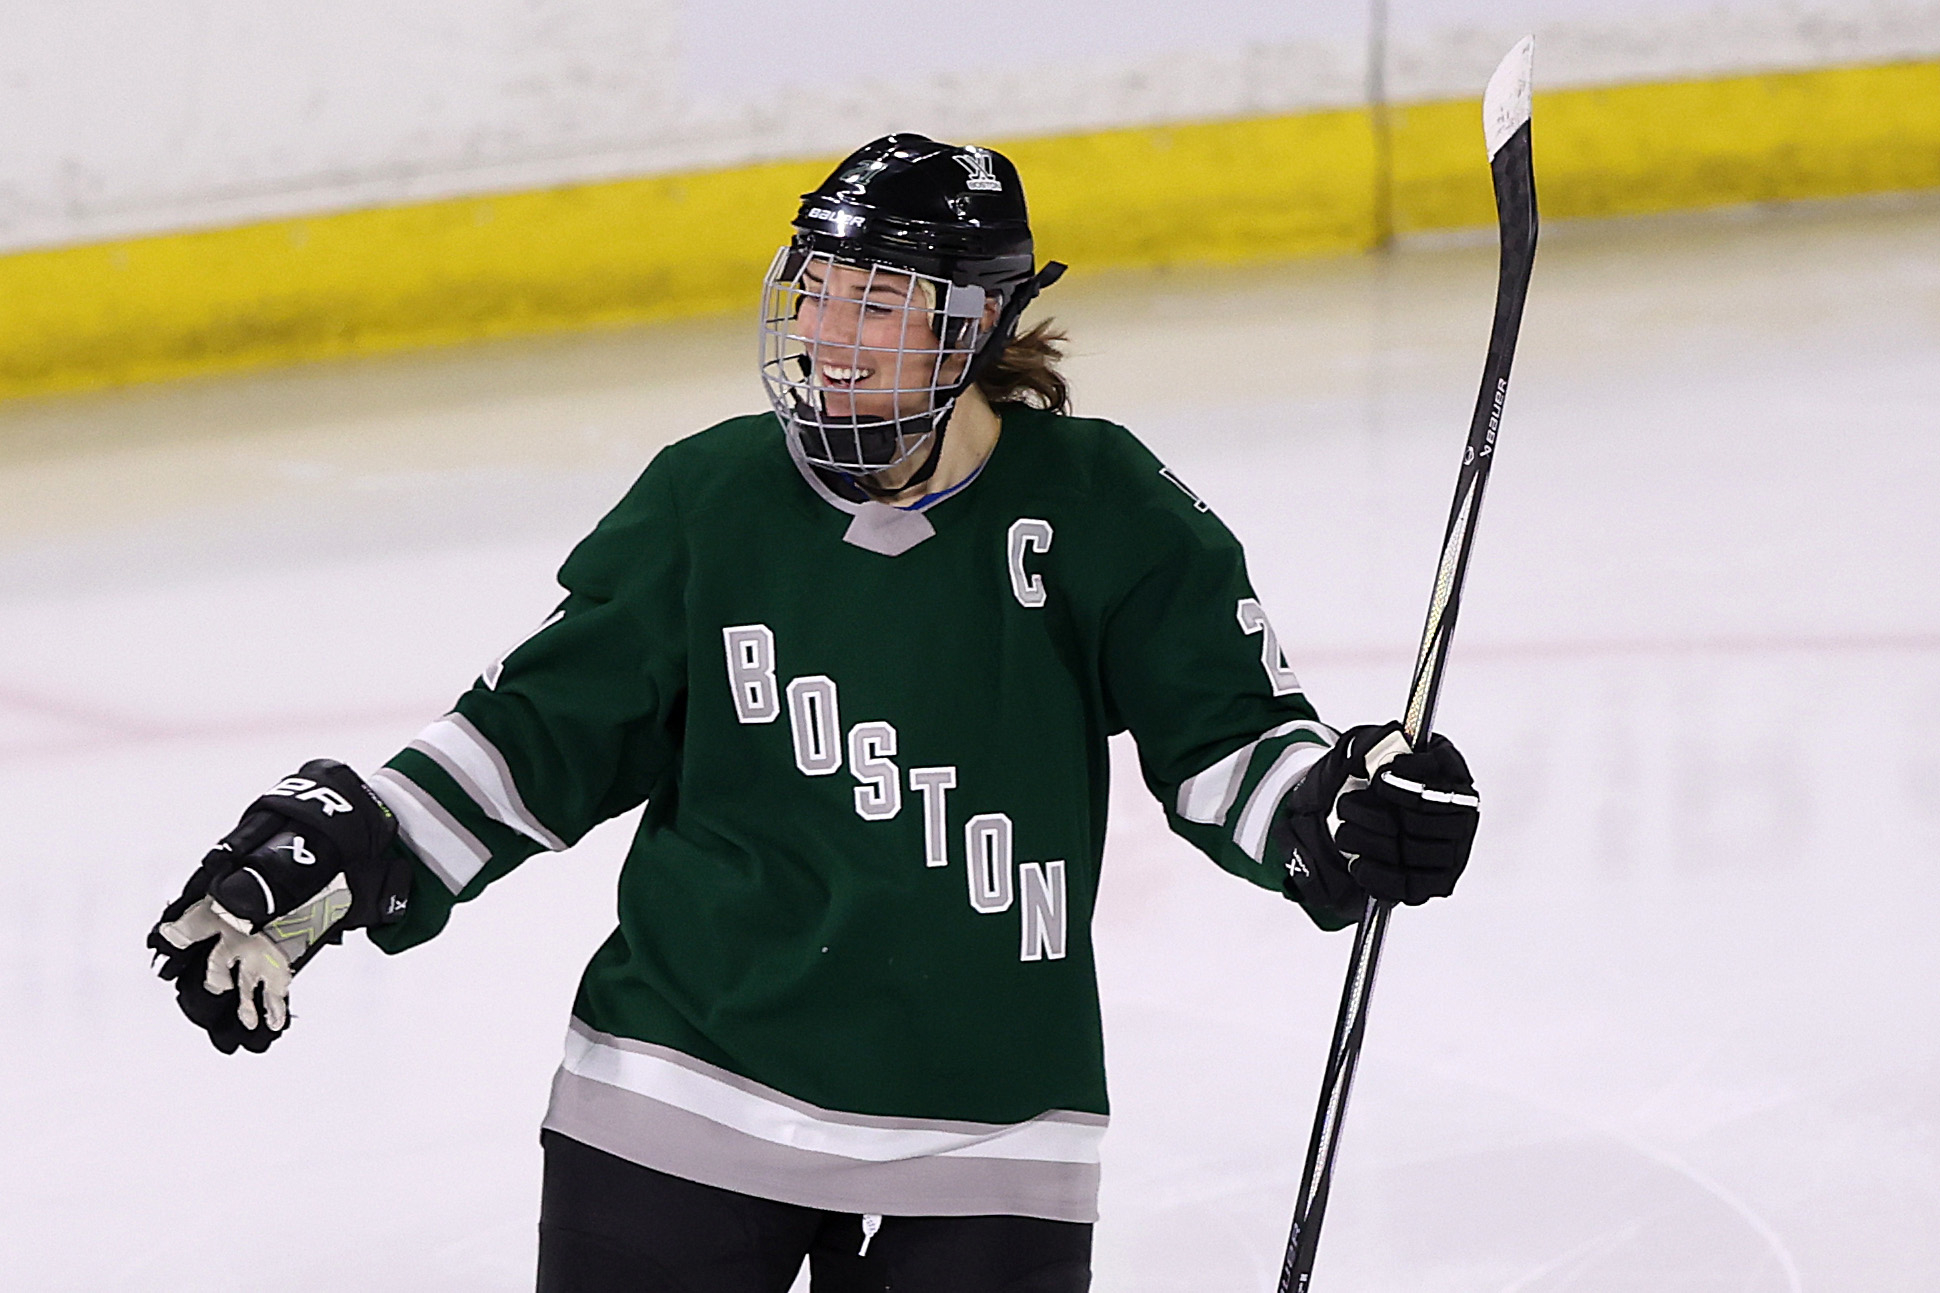 Female hockey player on ice celebrating with raised hockey stick, wearing Boston team uniform with a &quot;C&quot; captain&#x27;s letter